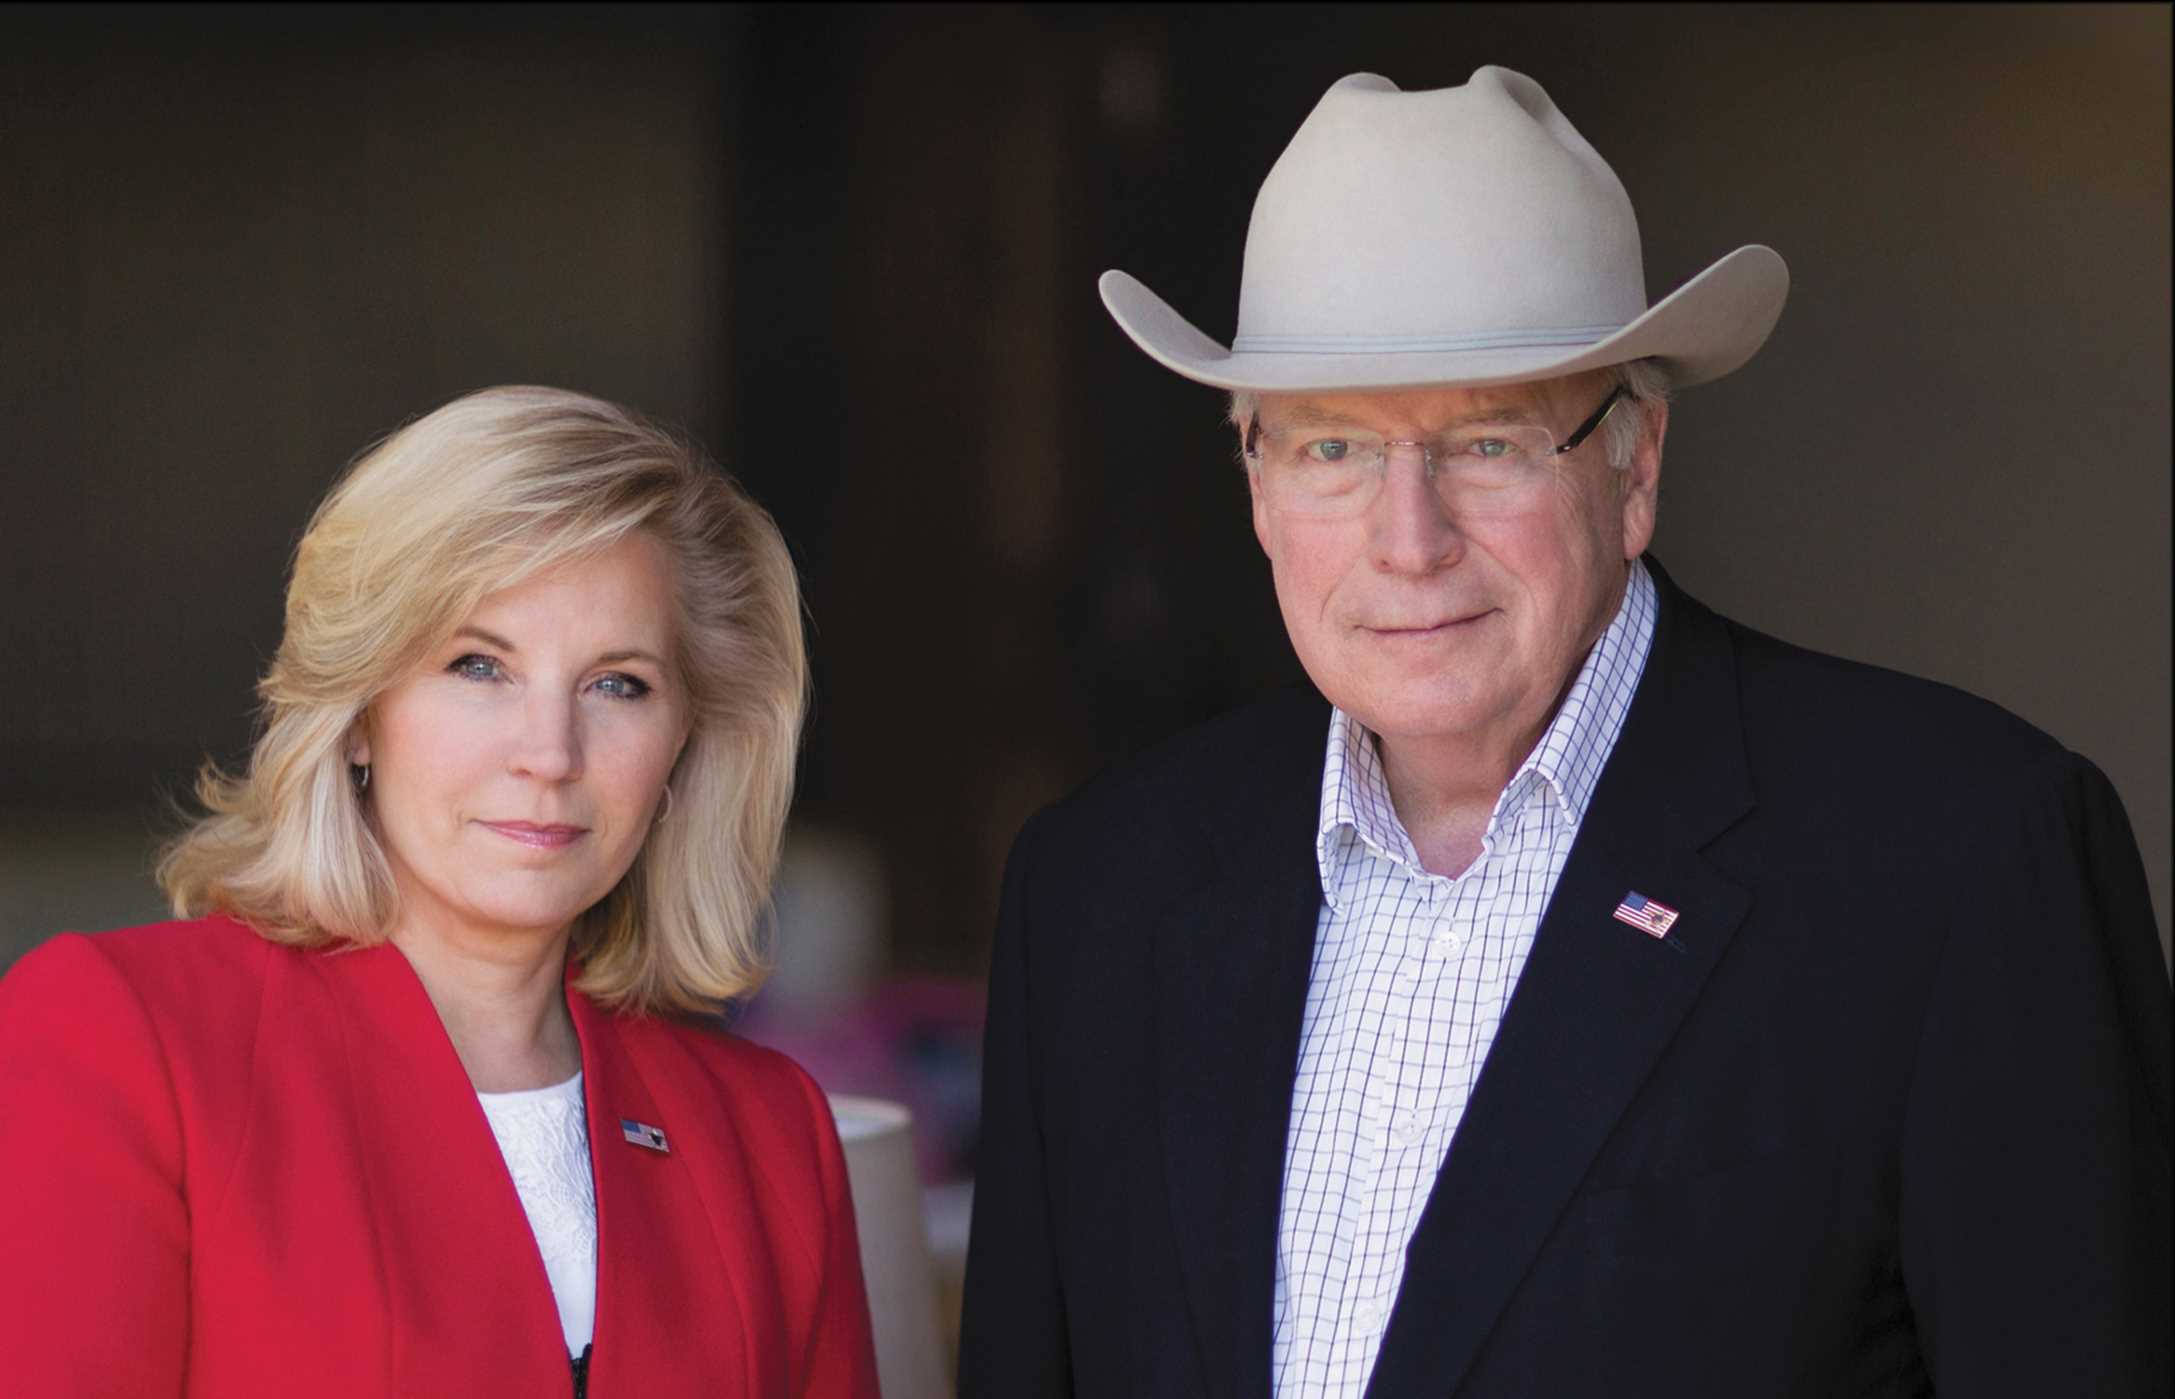 Dick cheney commercial for liz cheney